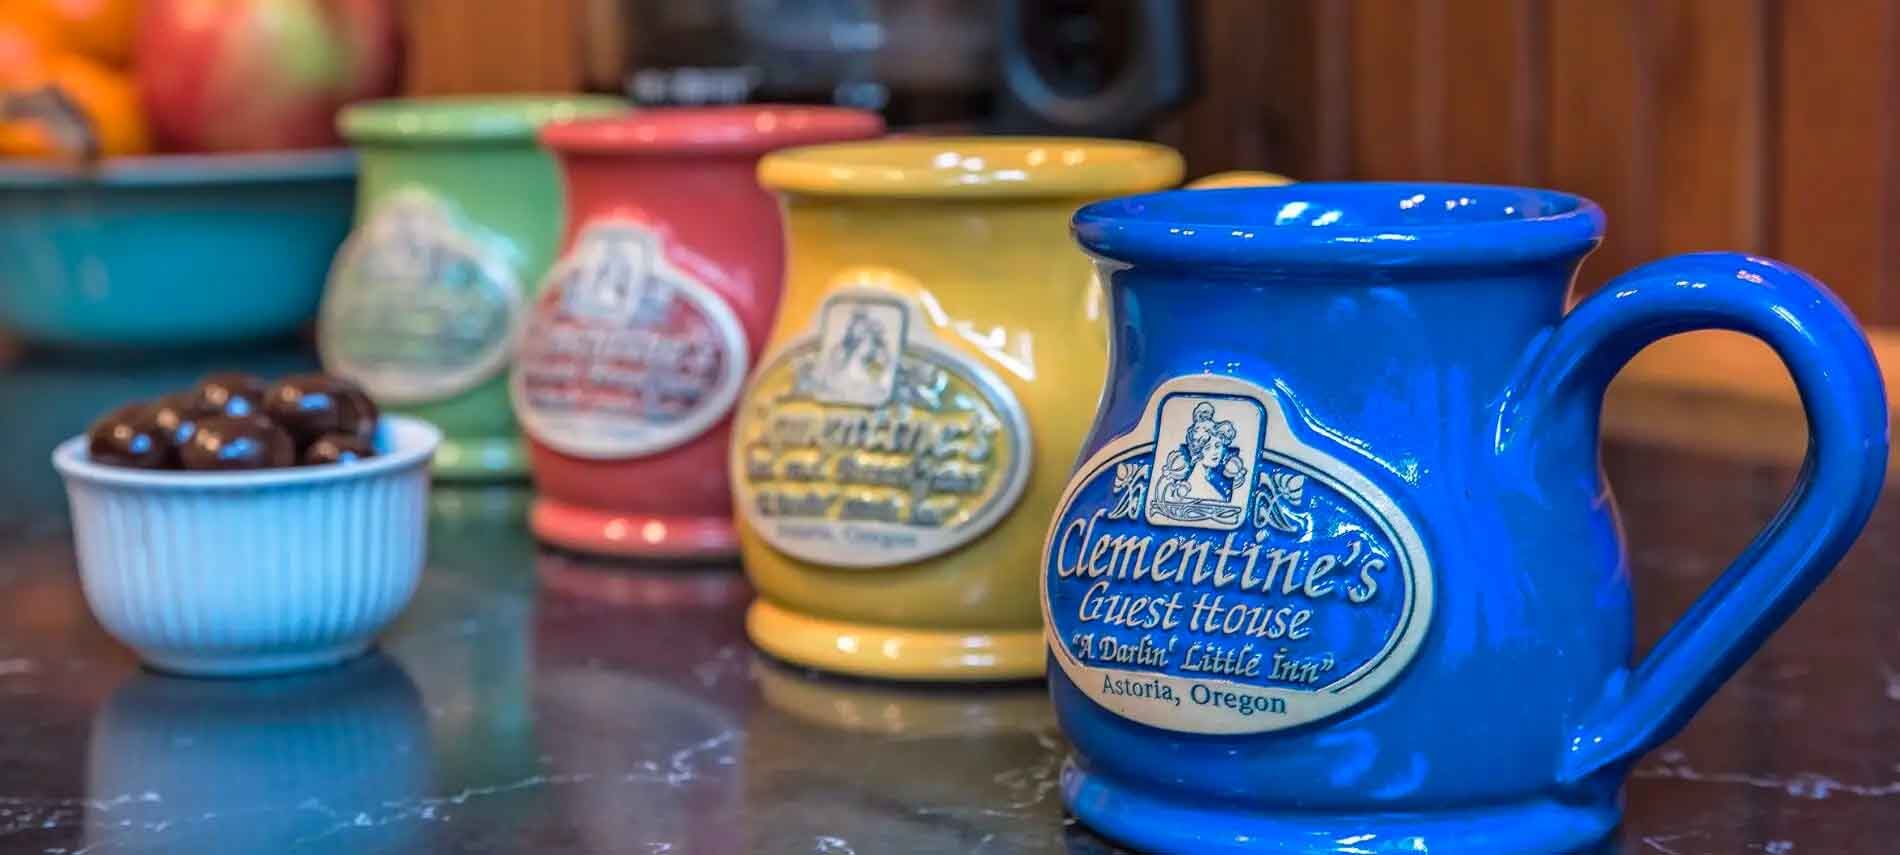 Row of brightly colored stoneware mugs with the Clementine's Guest House logo.